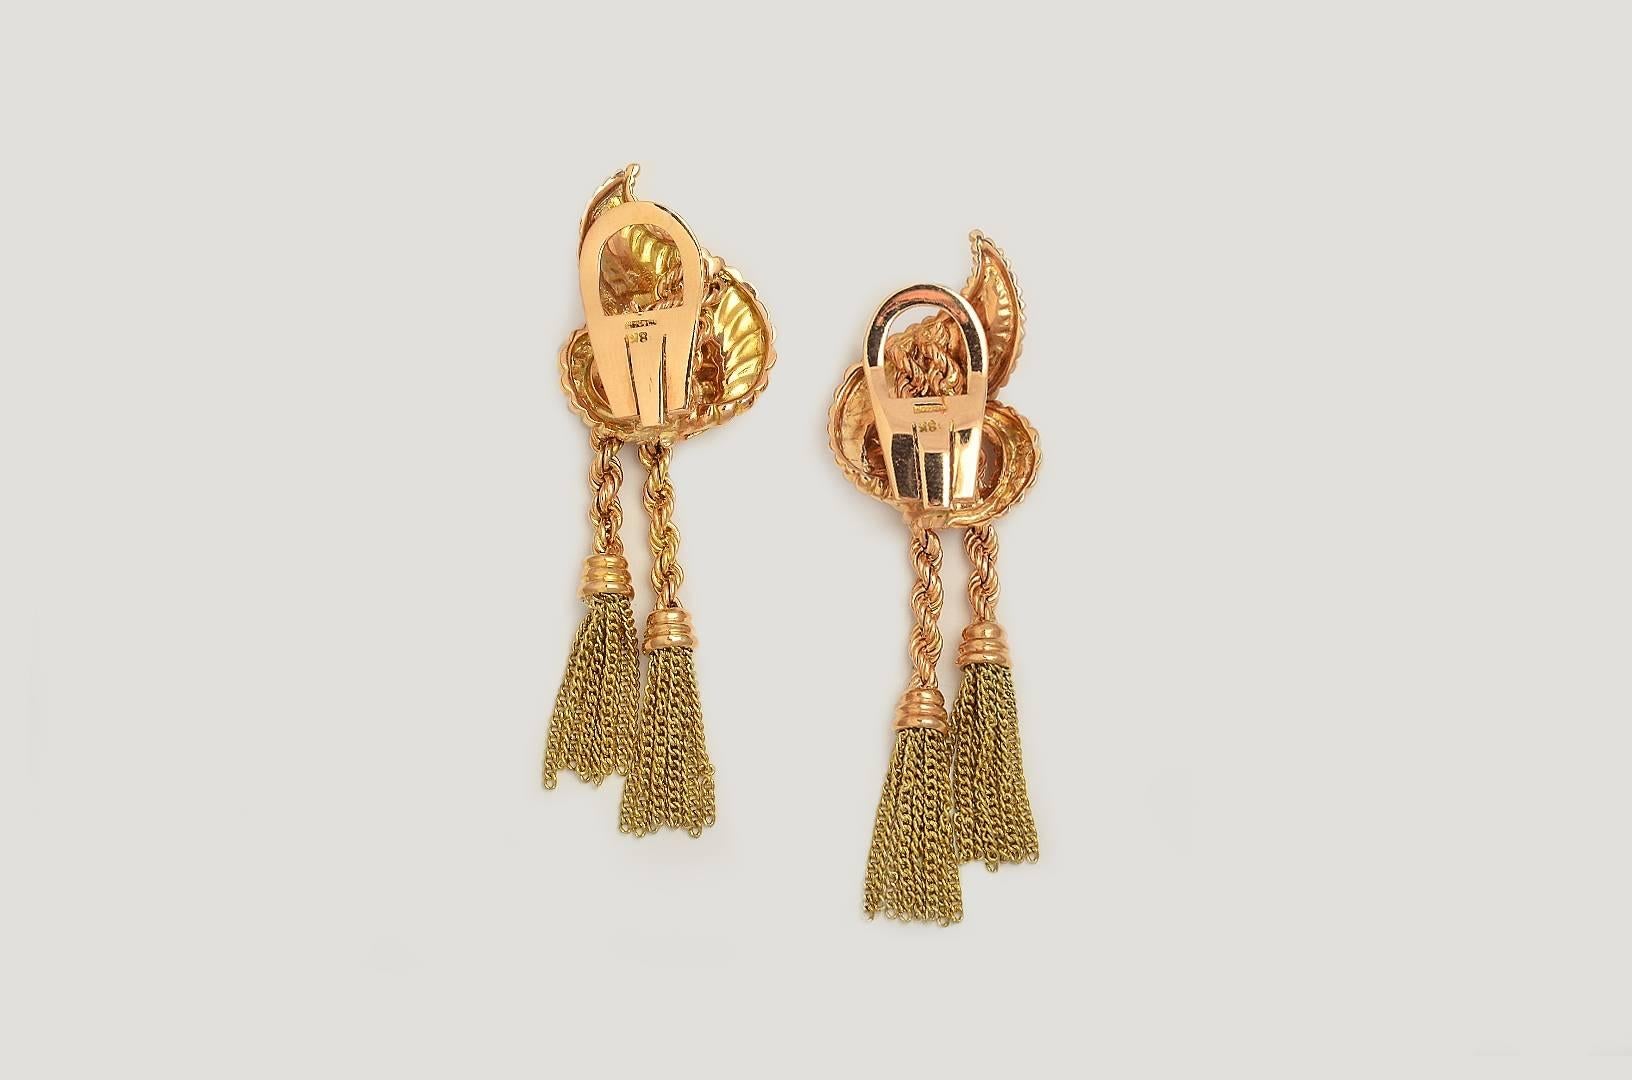 Made of Pink and Yellow Gold 18 Kts. and Platinum tassel earrings from the late 1940s. A pair of tassels falls assymetrically from each swirl motif ear clip set in pink-yellow Gold 18 kts, platinum and brillant cut-diamonds.